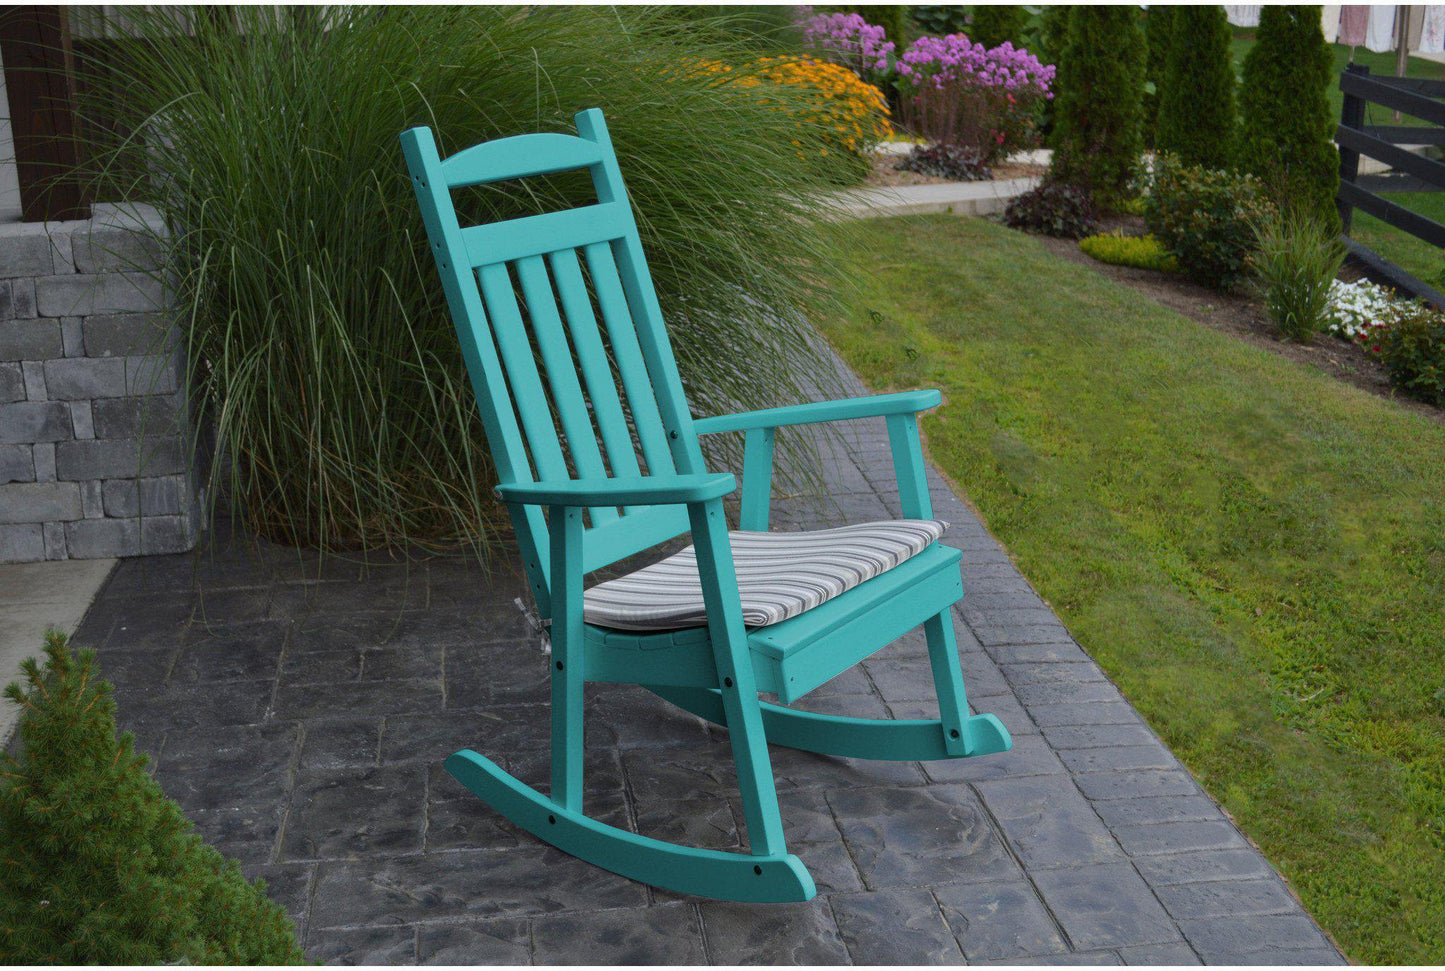 Rocking Chair - A&L Furniture Company Classic Recycled Plastic Porch Rocking Chair